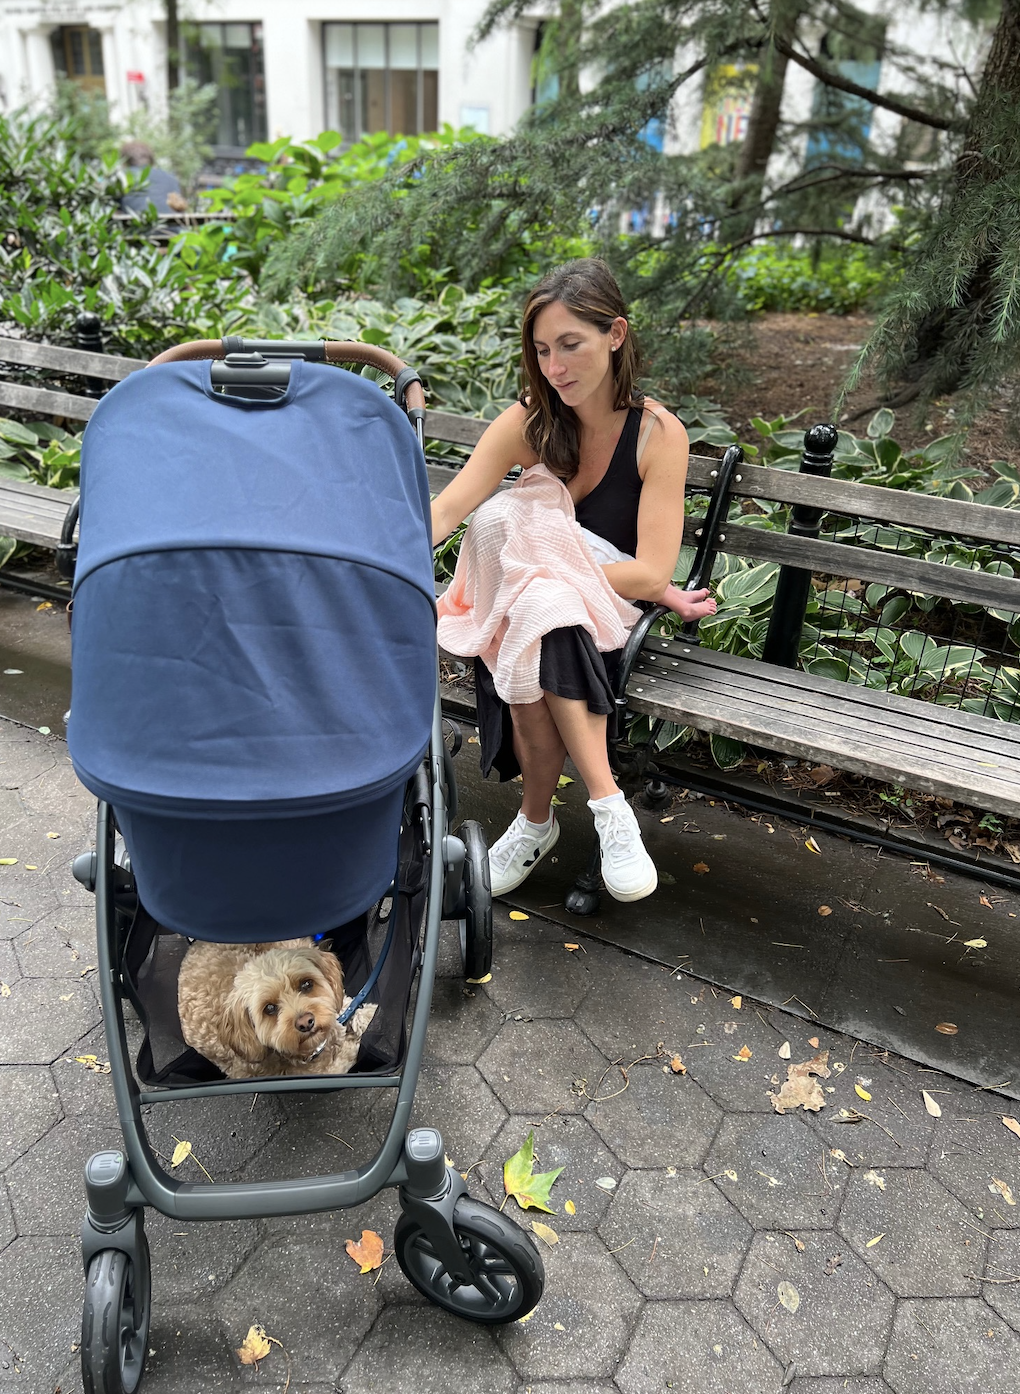 Mother sitting on a park bench, feeding an infant covered with a blanket, next to a stroller with a small dog inside